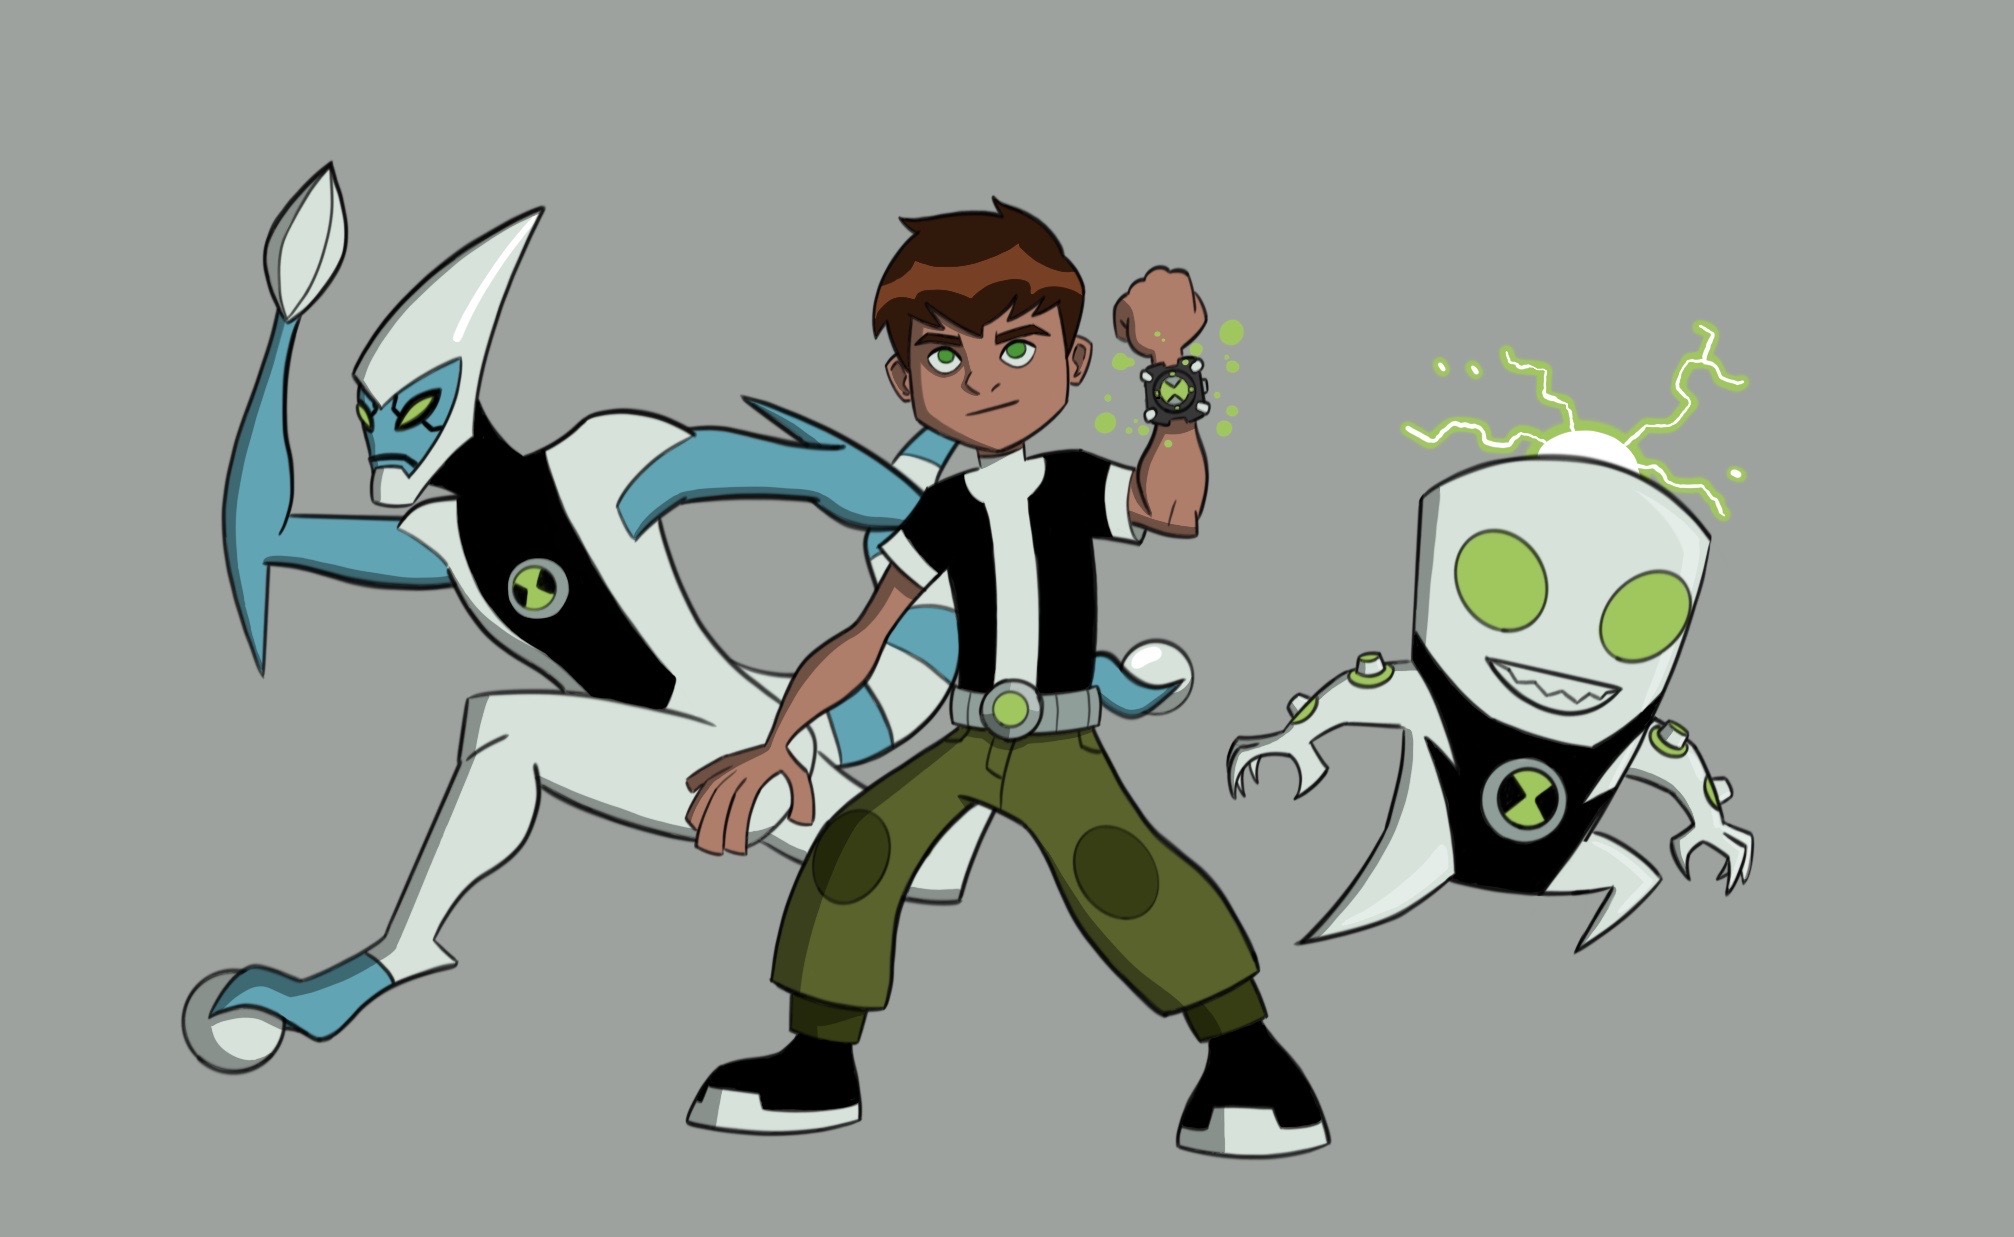 Ben 10,000 - Mr. and Mrs. Tennyson comic-style art by bnelson19 on  DeviantArt